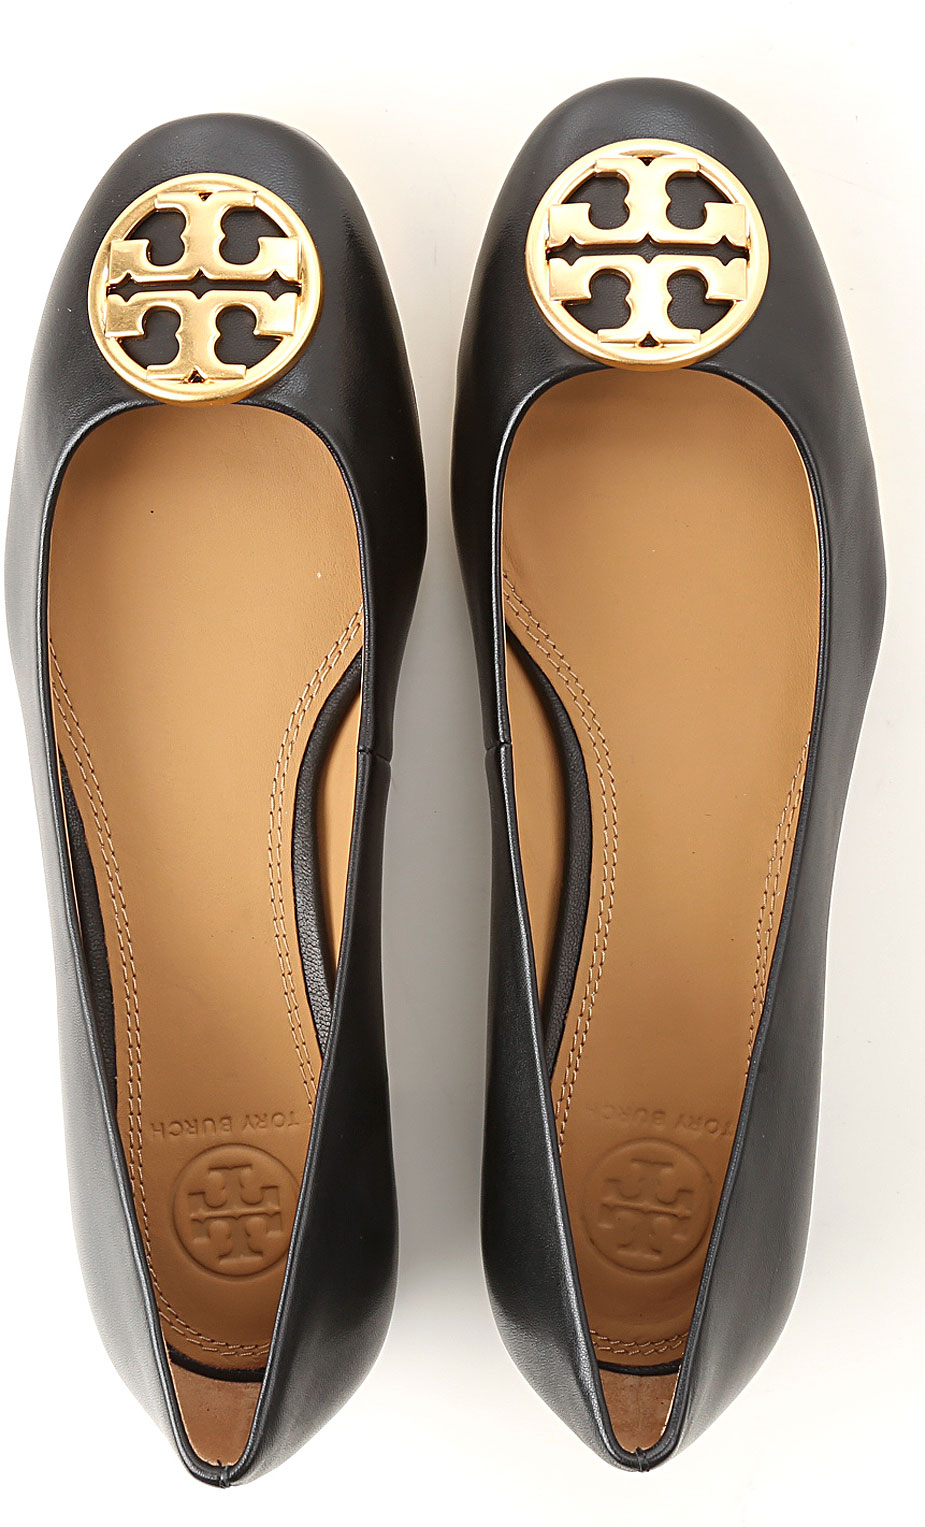 Womens Shoes Tory Burch, Style code: 50804-006-